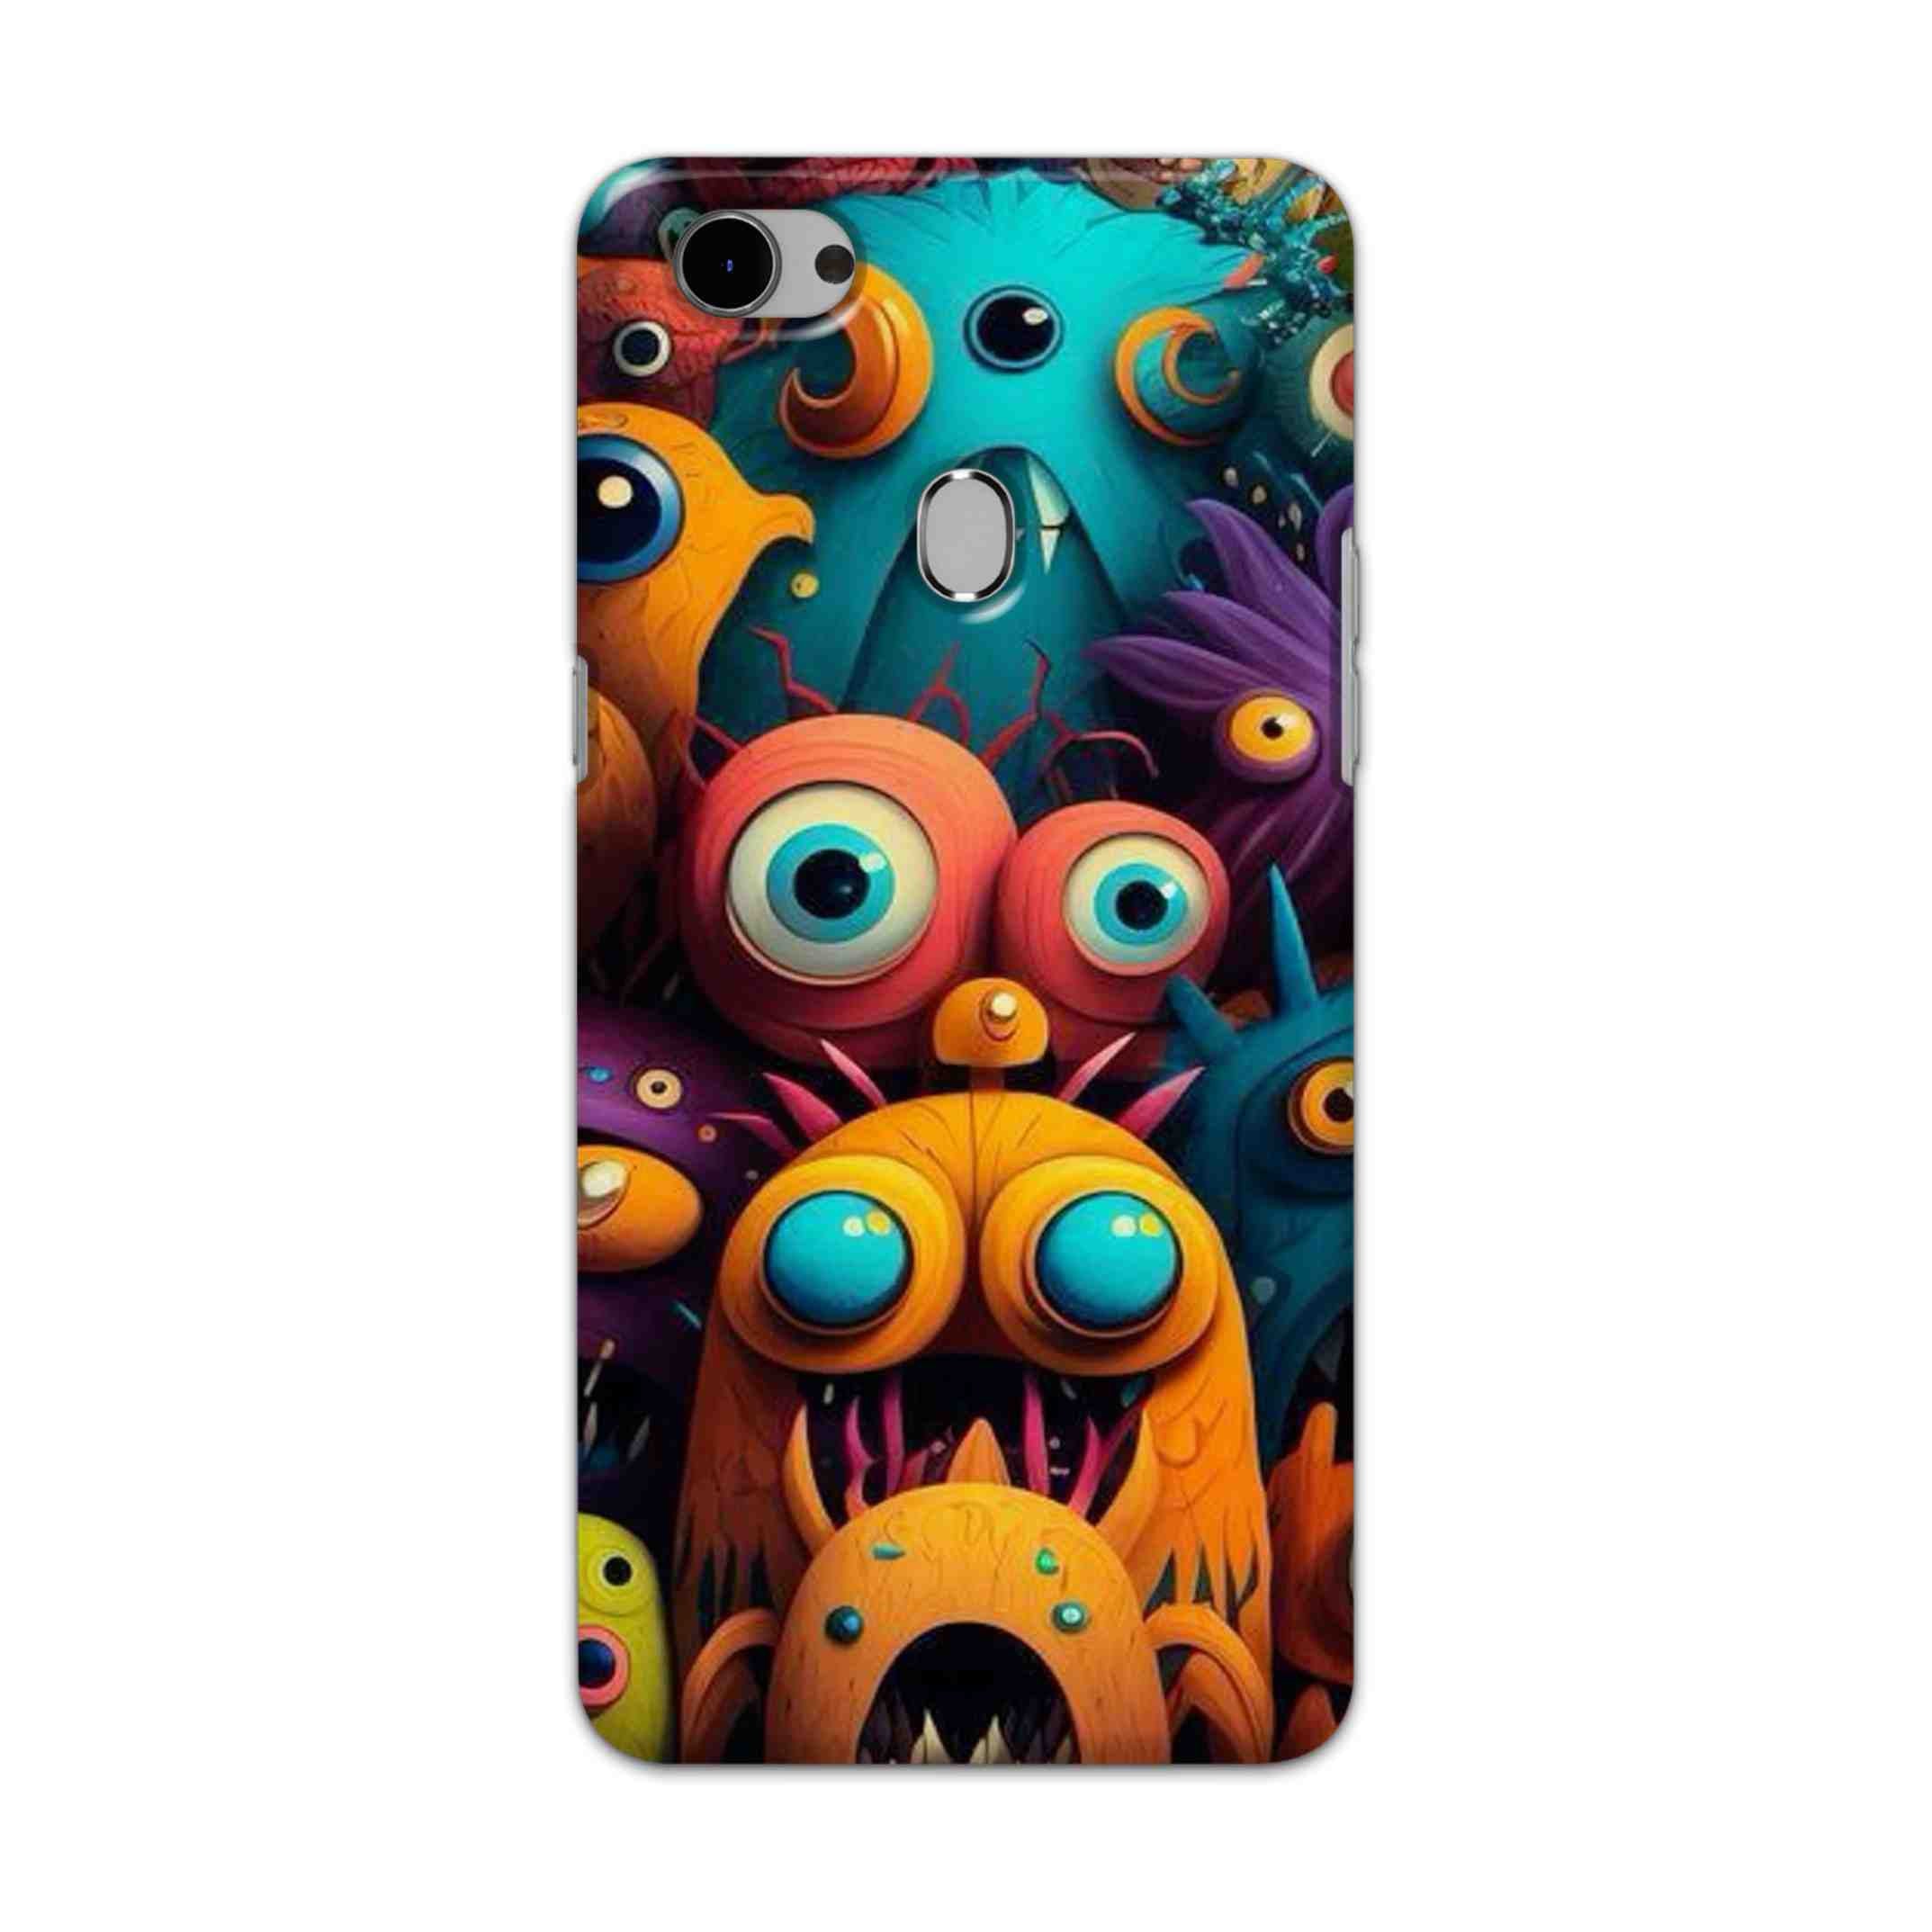 Buy Zombie Hard Back Mobile Phone Case Cover For Oppo F7 Online